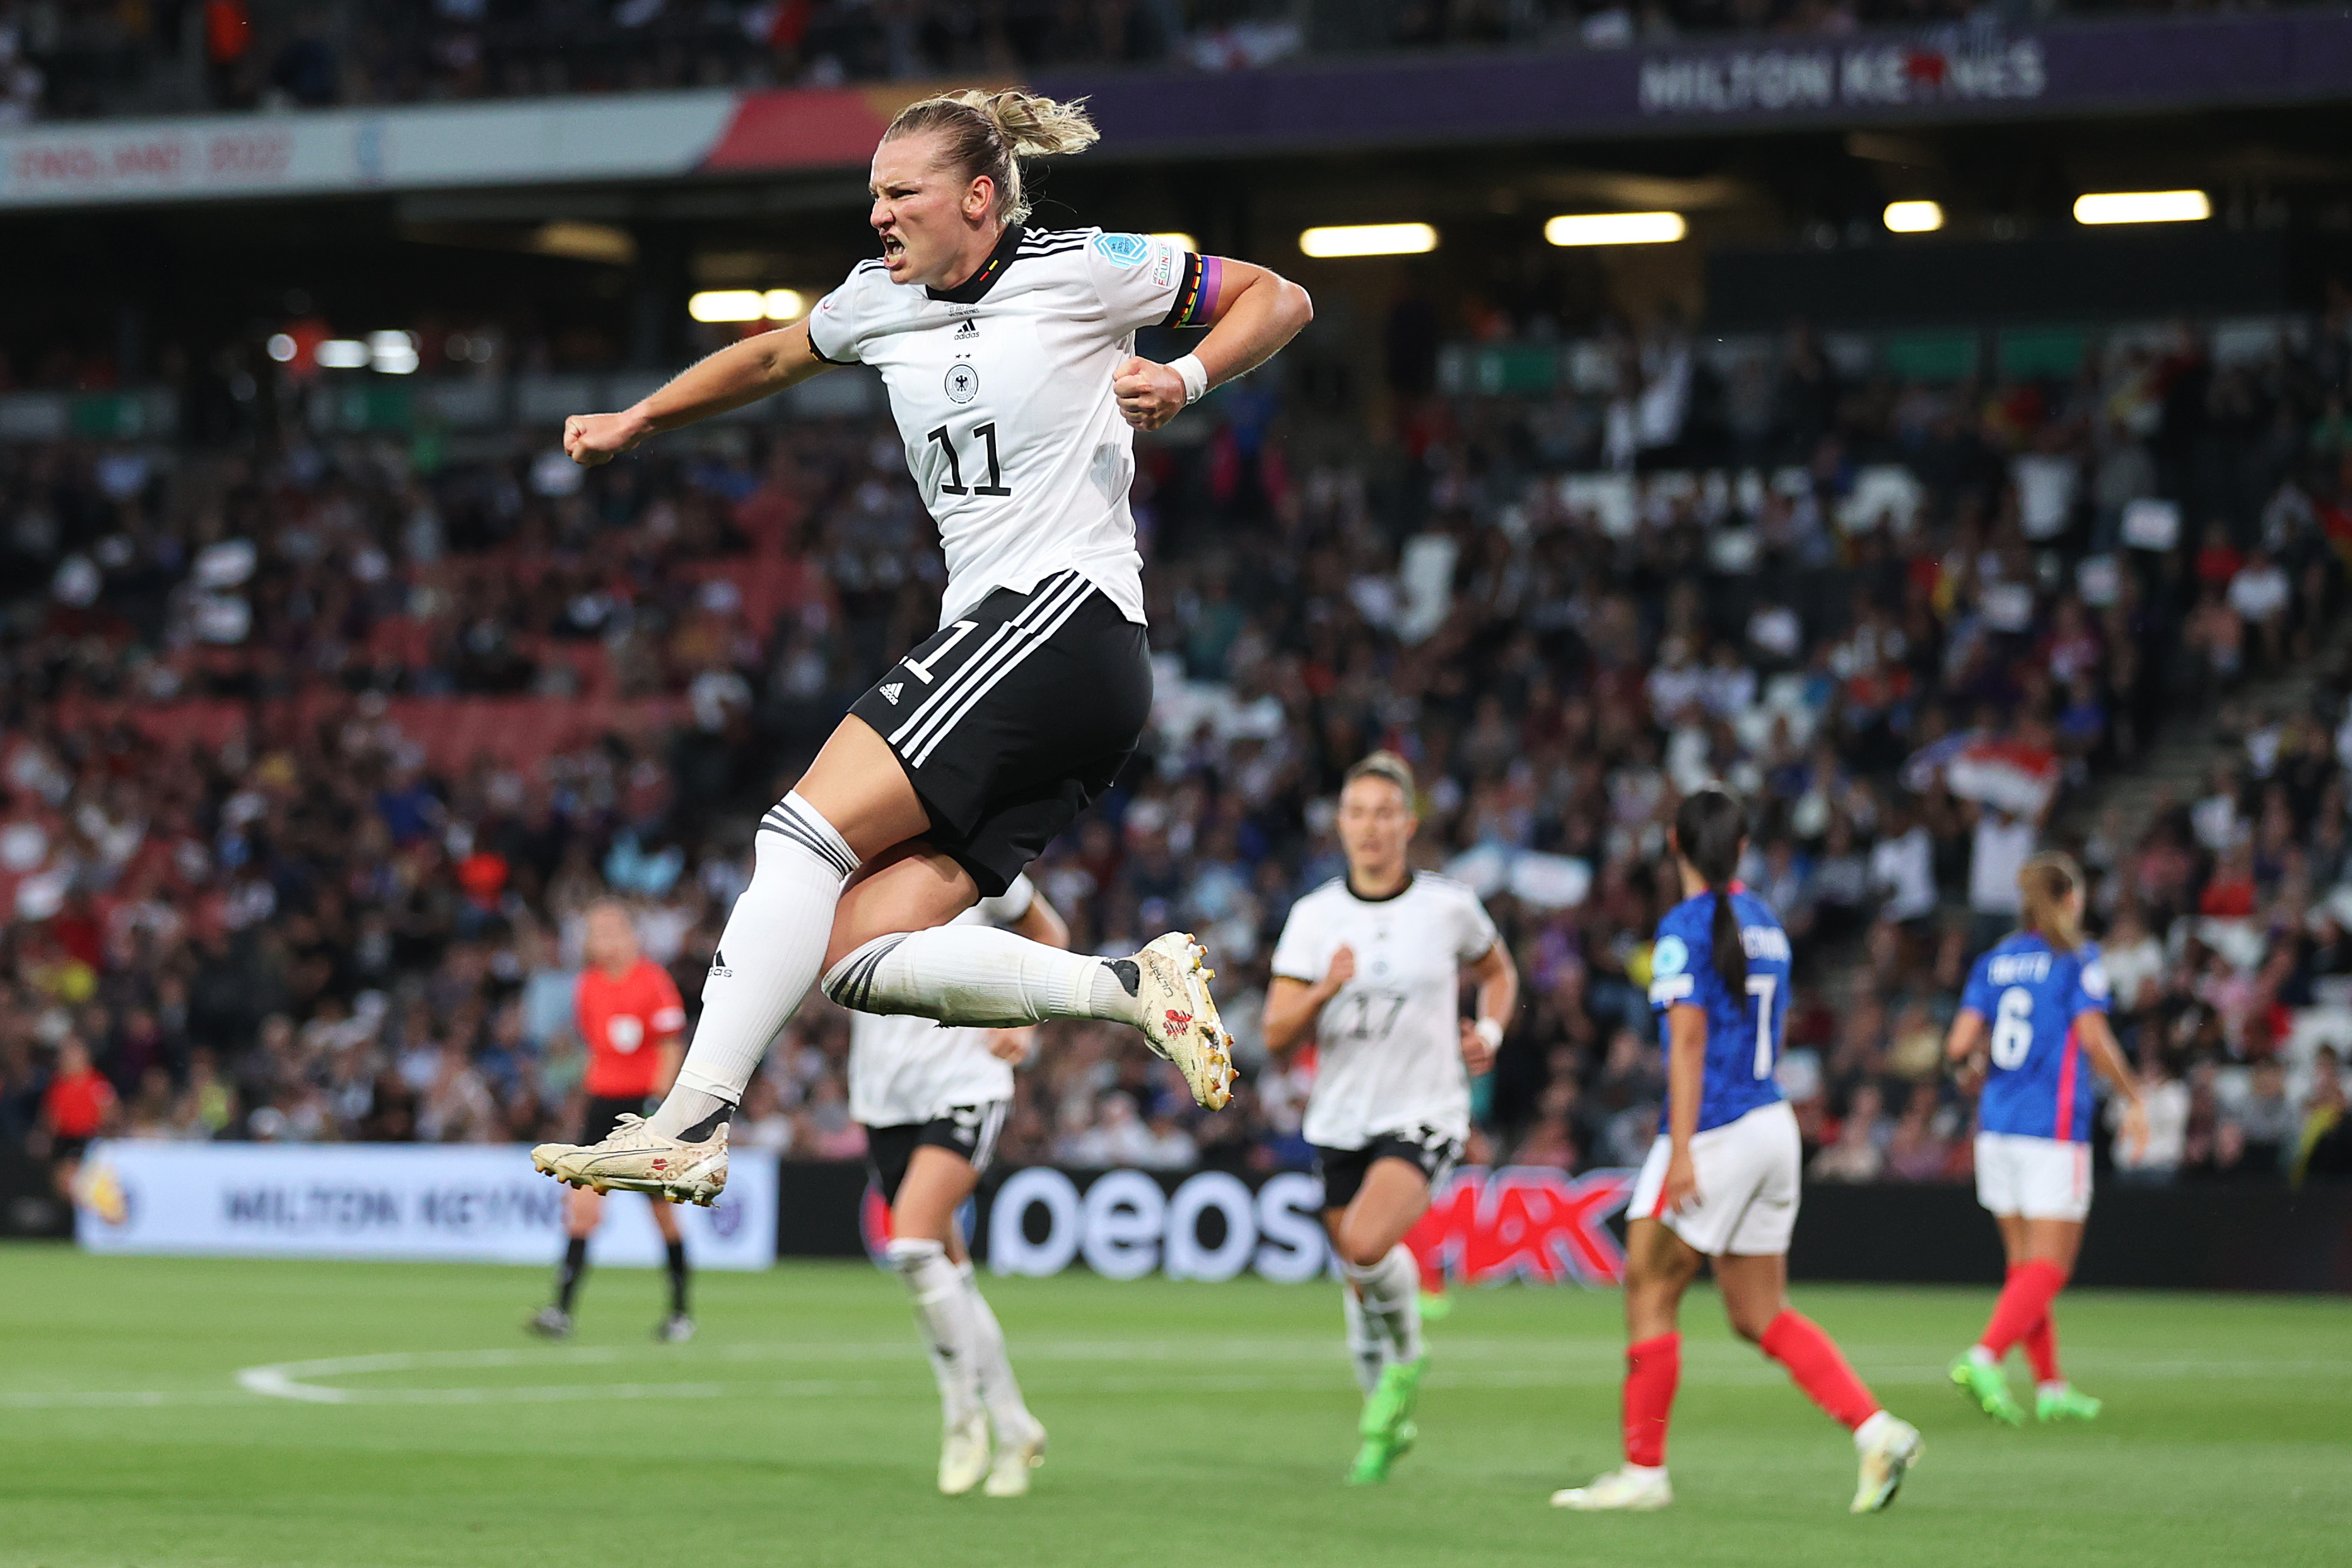 Popp leaps in the air after scoring the opening goal against France